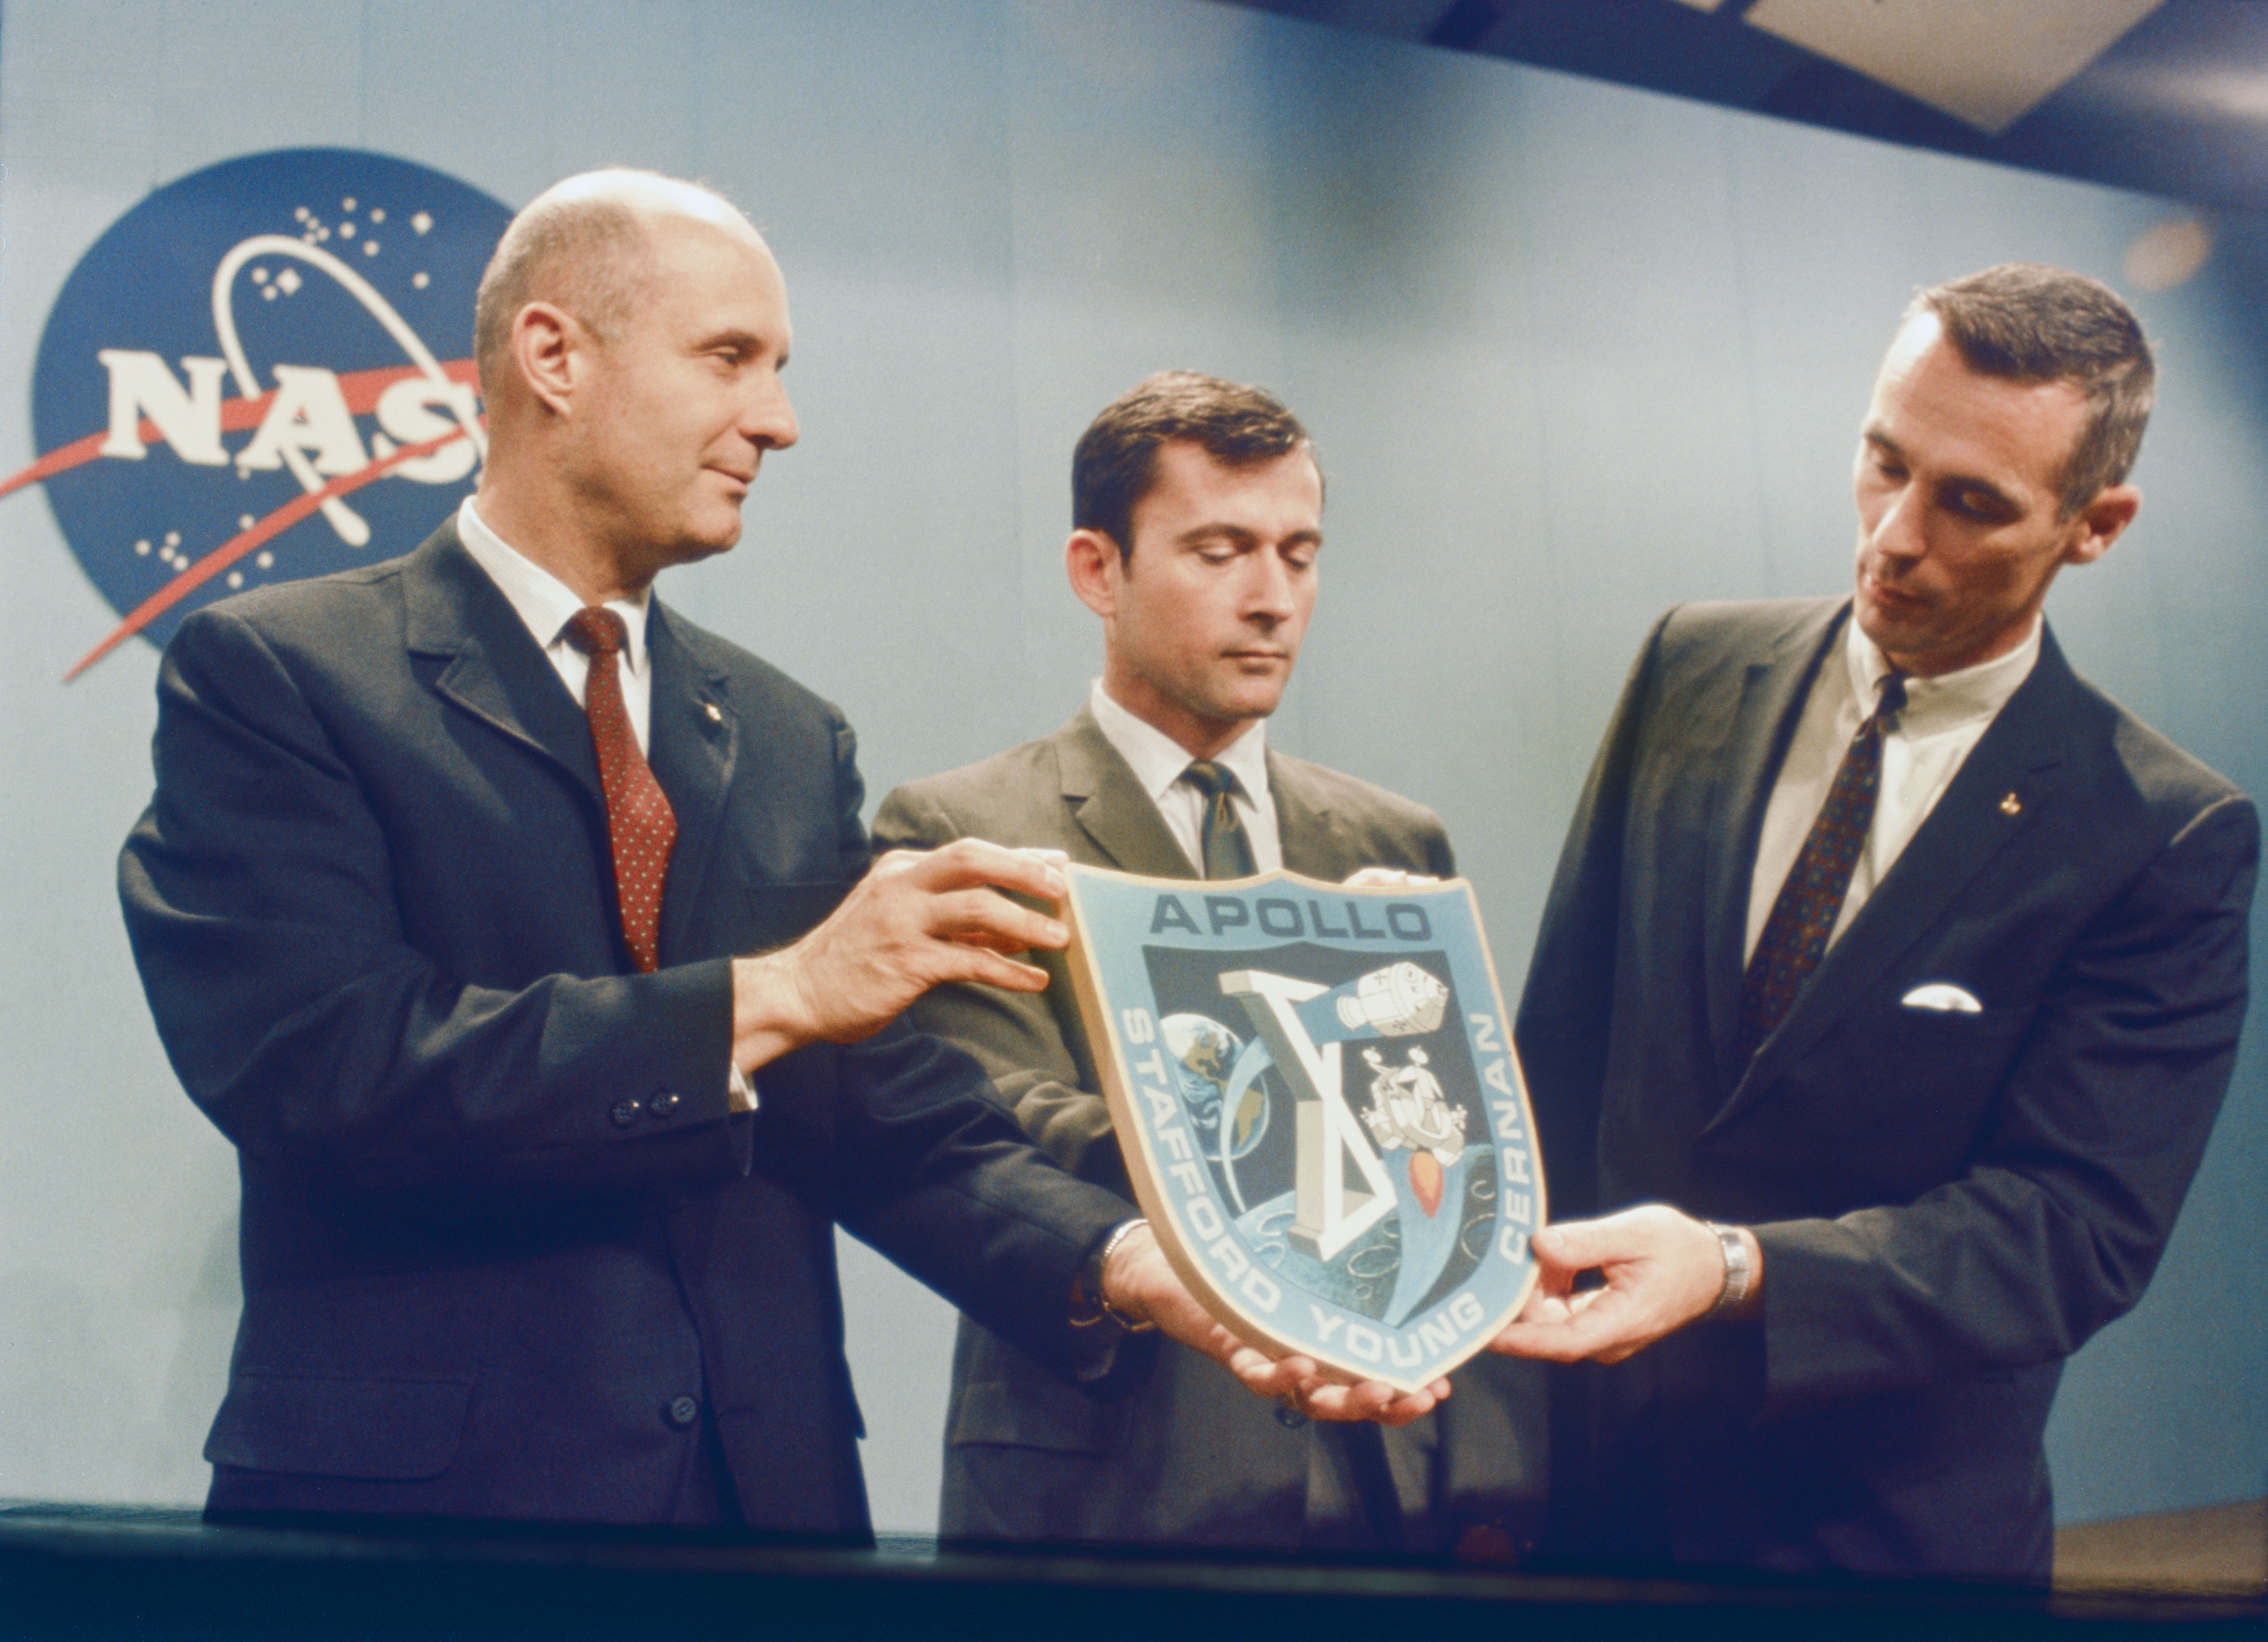 Stafford, left, Young, and Cernan hold their mission patch following a press conference at the Manned Spacecraft Center, now NASA's Johnson Space Center in Houston